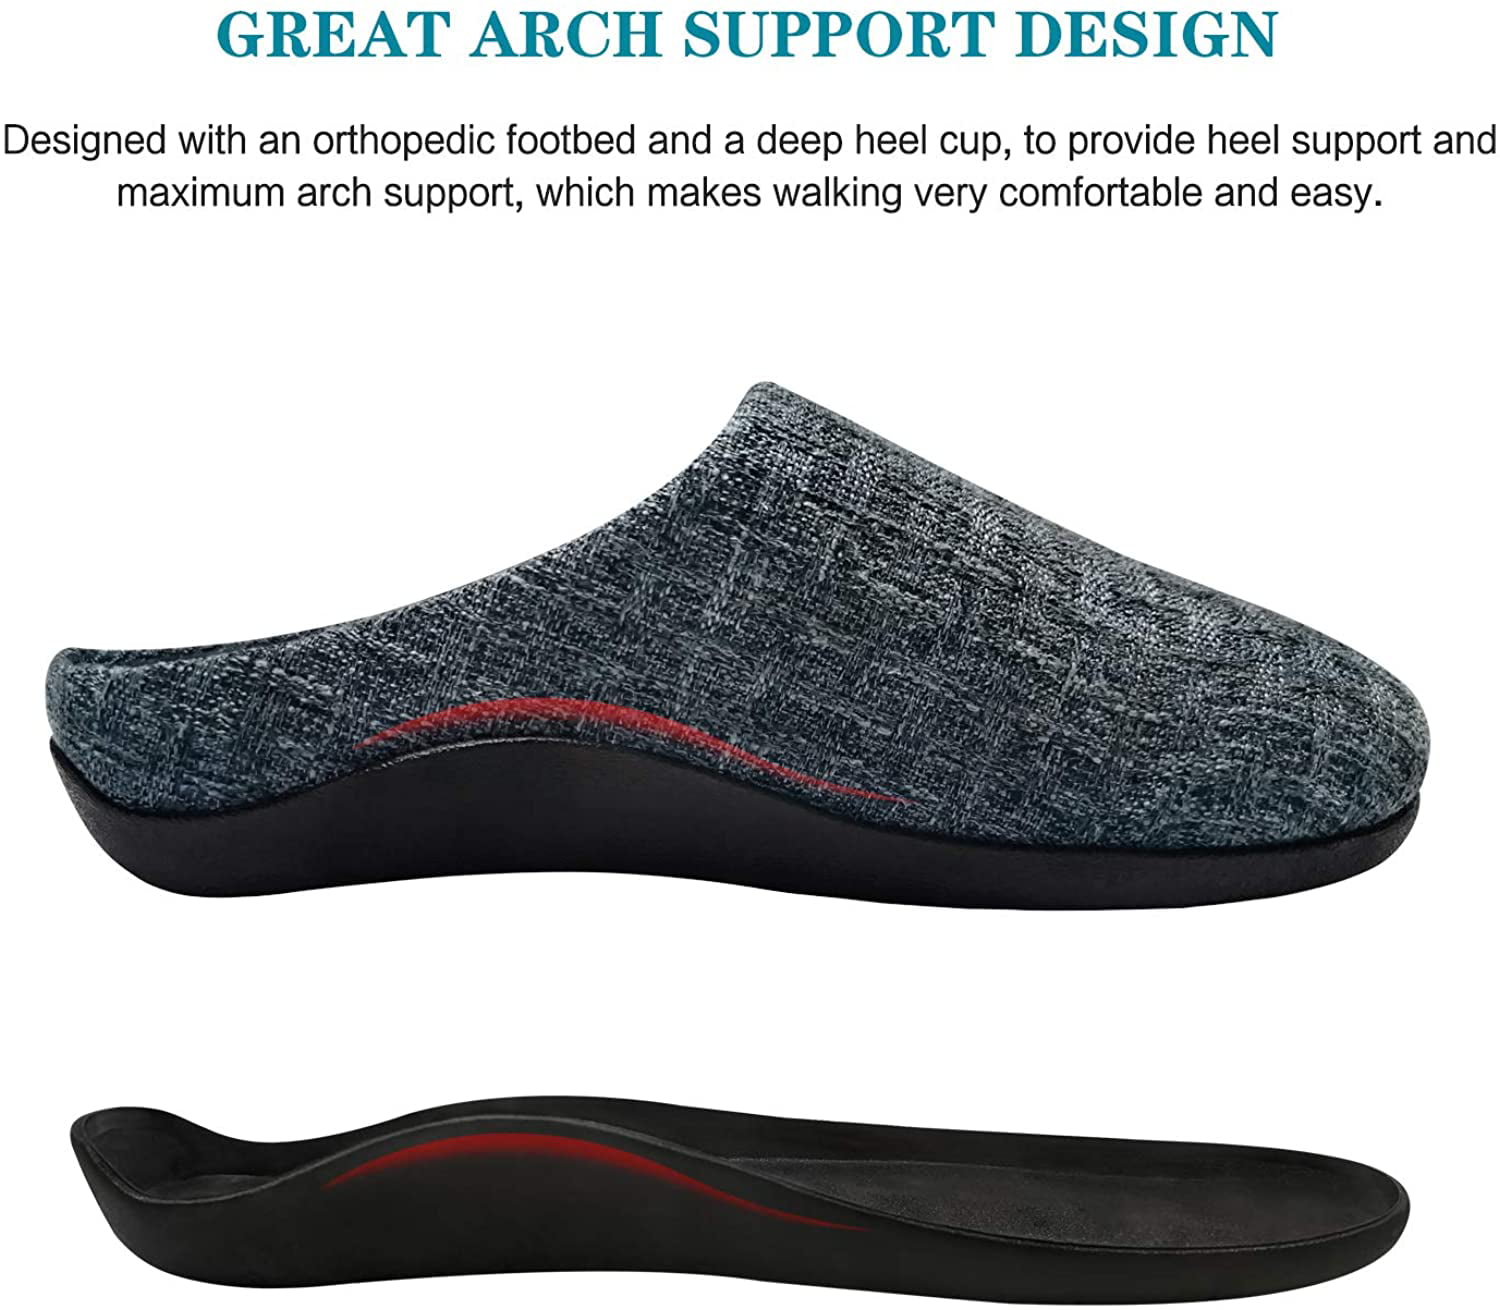 Comfortable Orthopedic Clog House Shoes with Indoor Outdoor Anti-Skid Rubber Orthotic Slippers with Arch Support for Plantar Fasciitis Pain Relief 